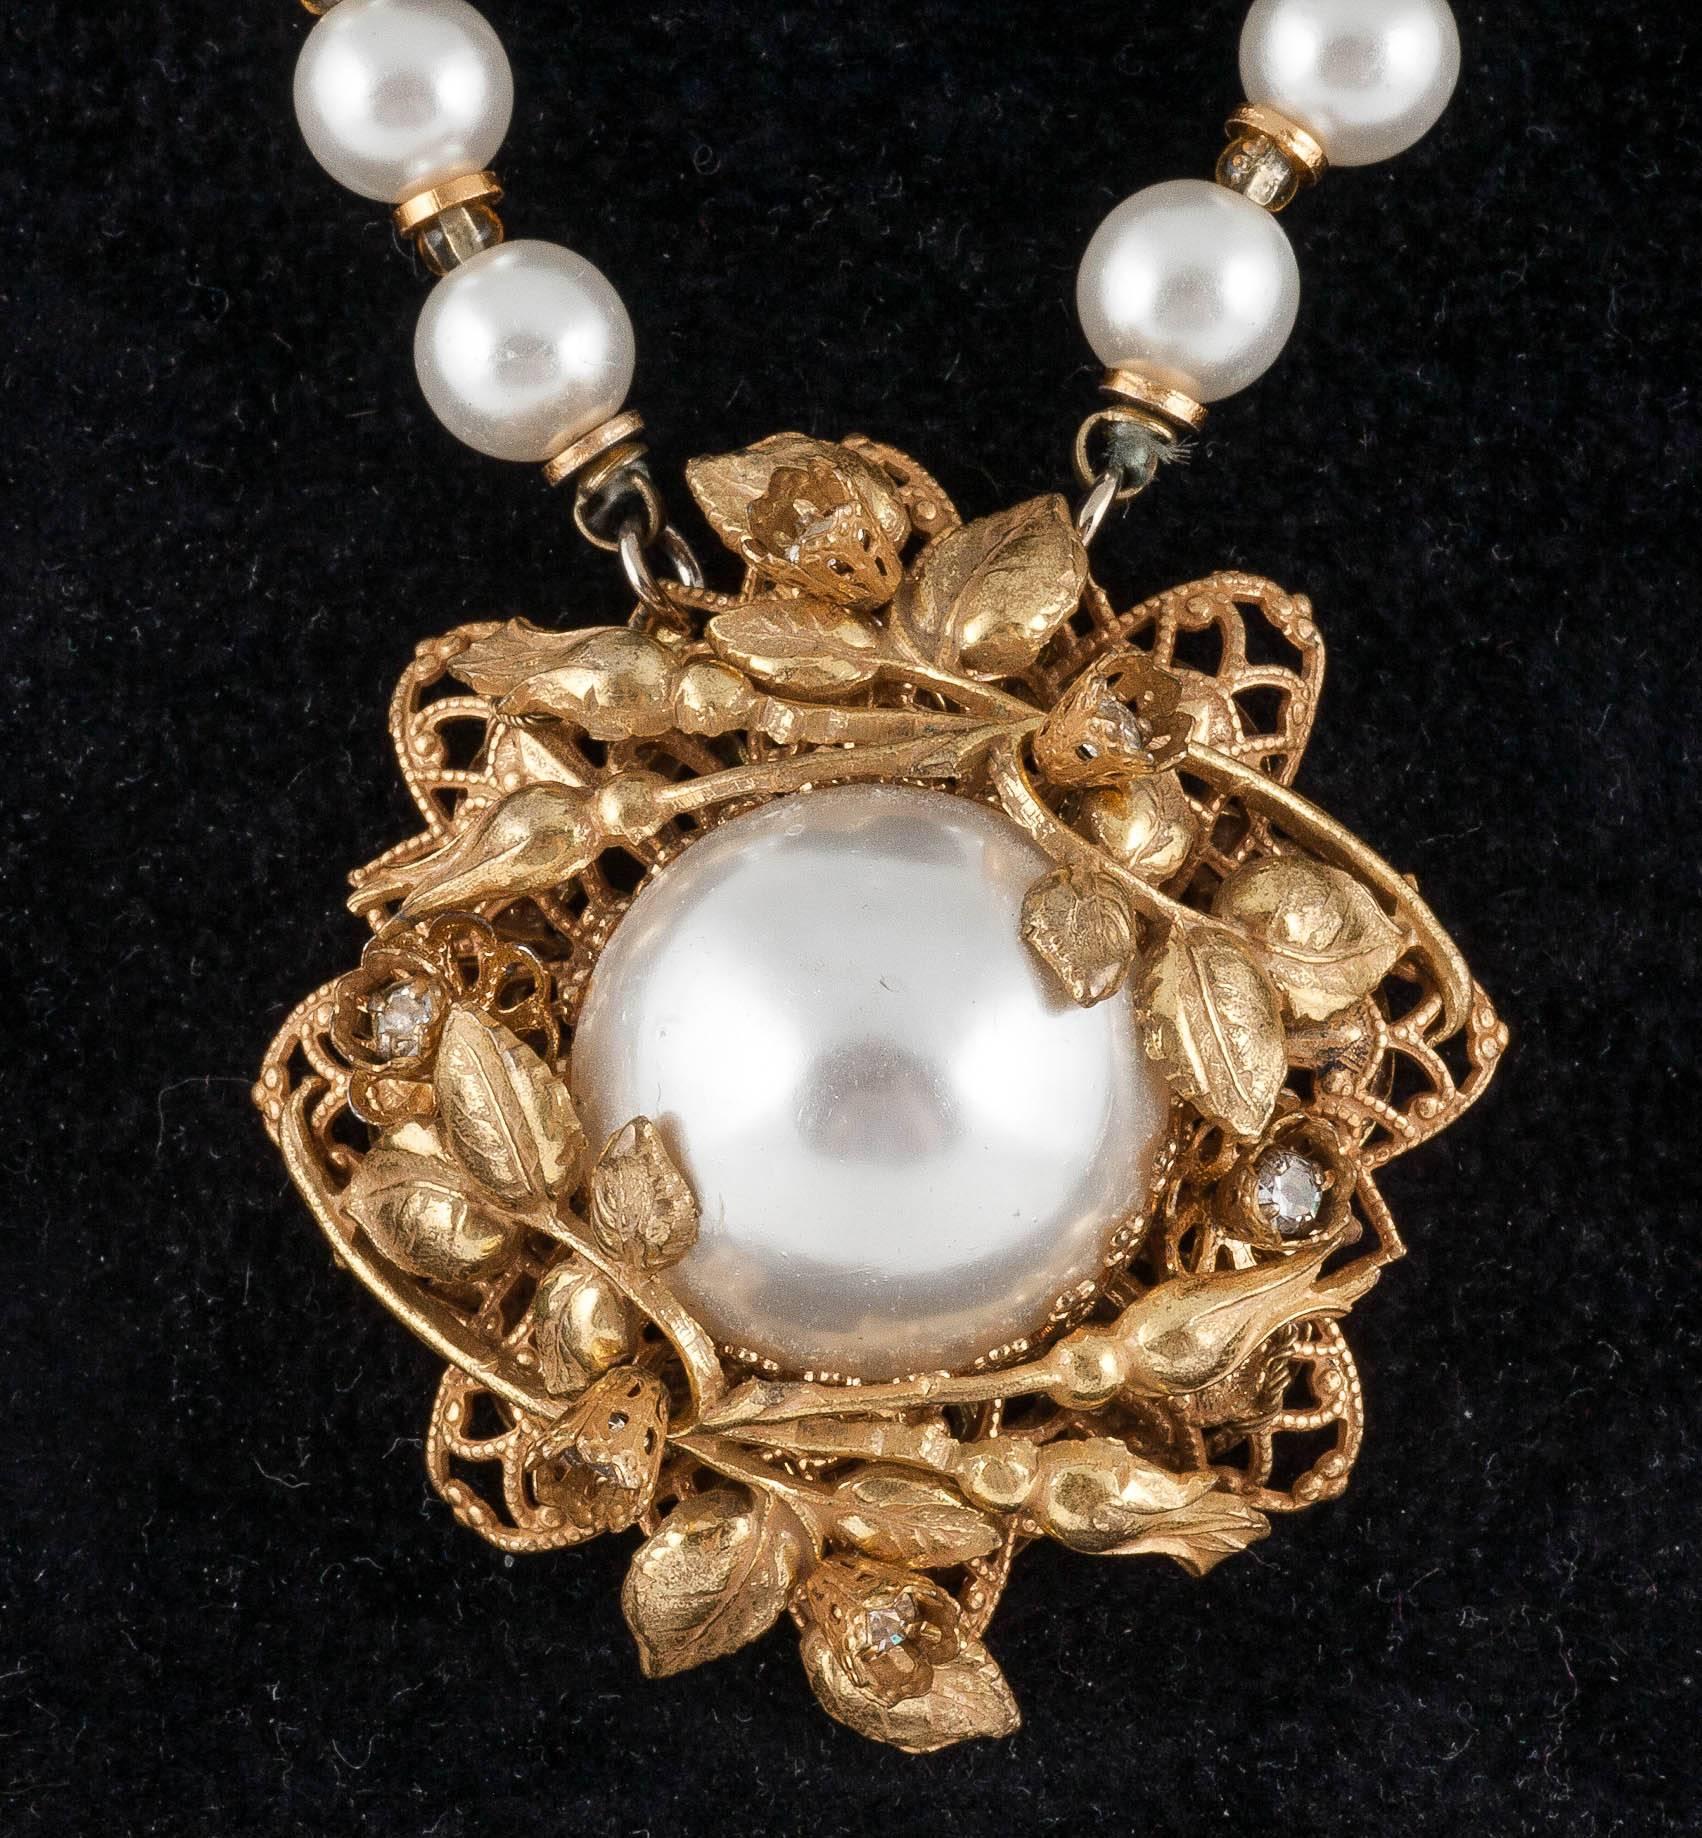 This lovely super wearable pendant necklace is made with glass faux pearls which makes it very light The soft Russian gilt flowers have lovely rhinestone insets which give little glints dotted all over the pendant. The gilt spacers between the